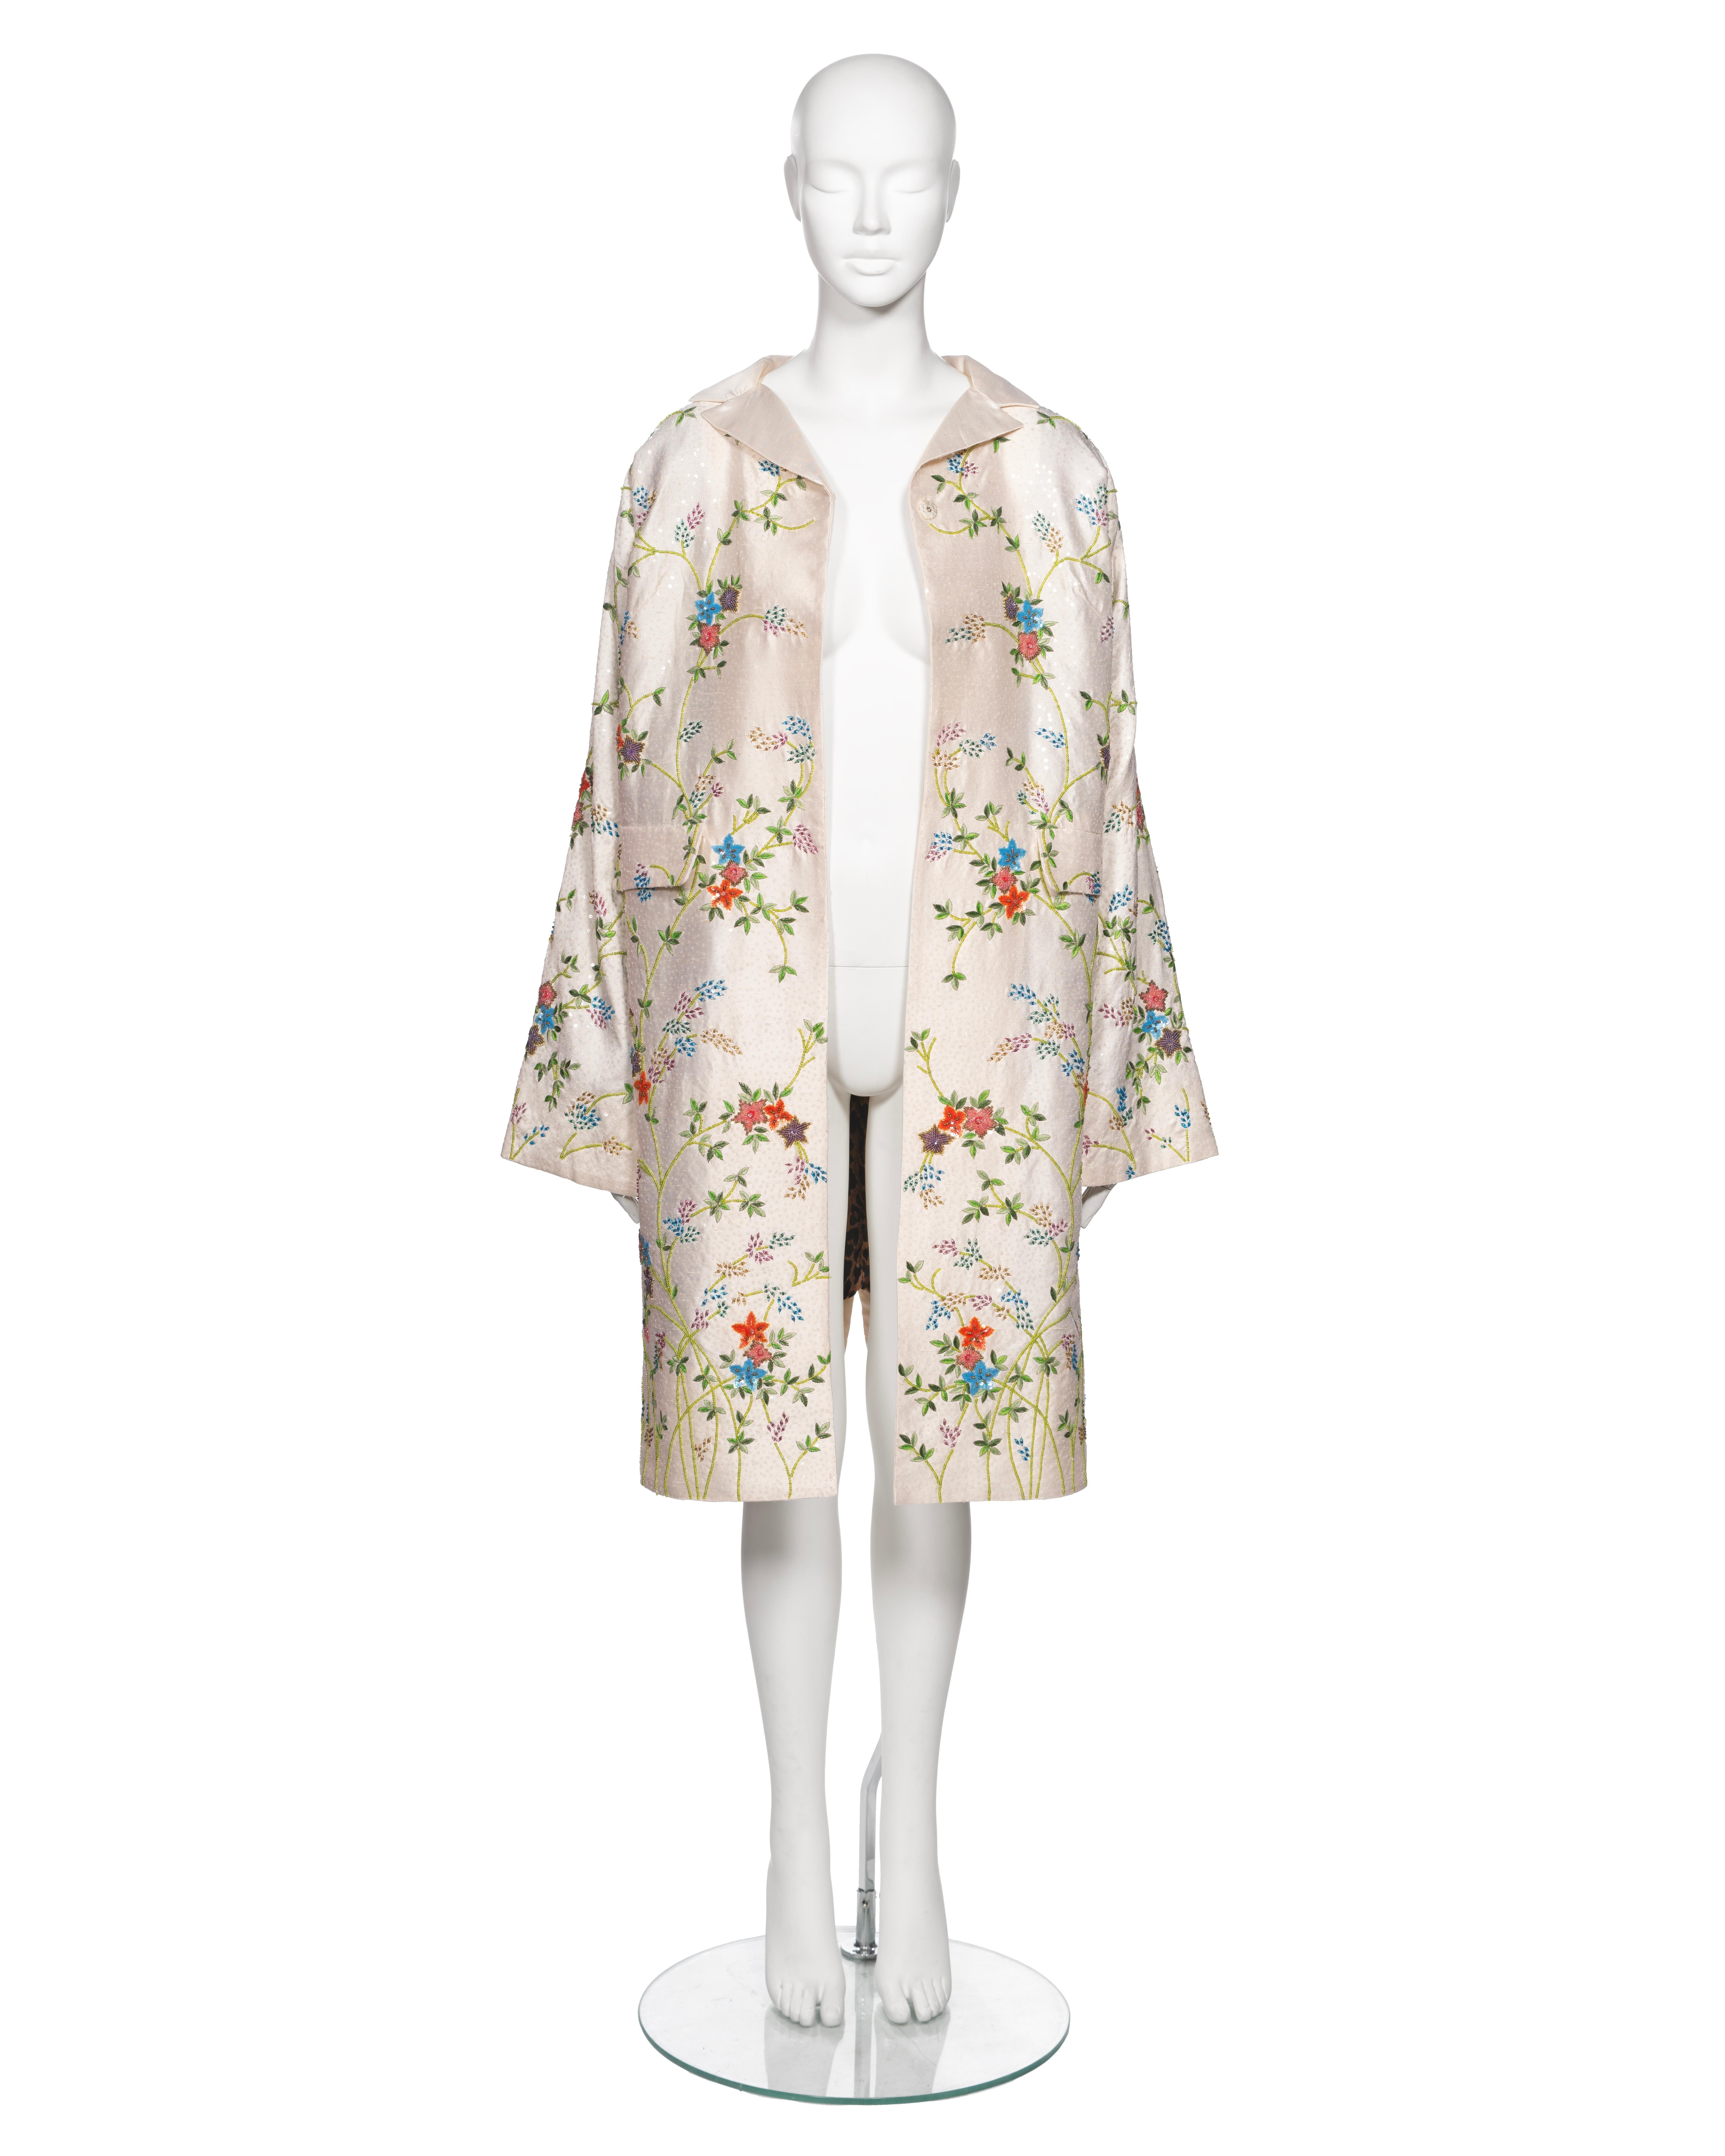 Dolce & Gabbana Hand-Embroidered White Raw Silk Evening Couture Coat, ss 1997 For Sale 2